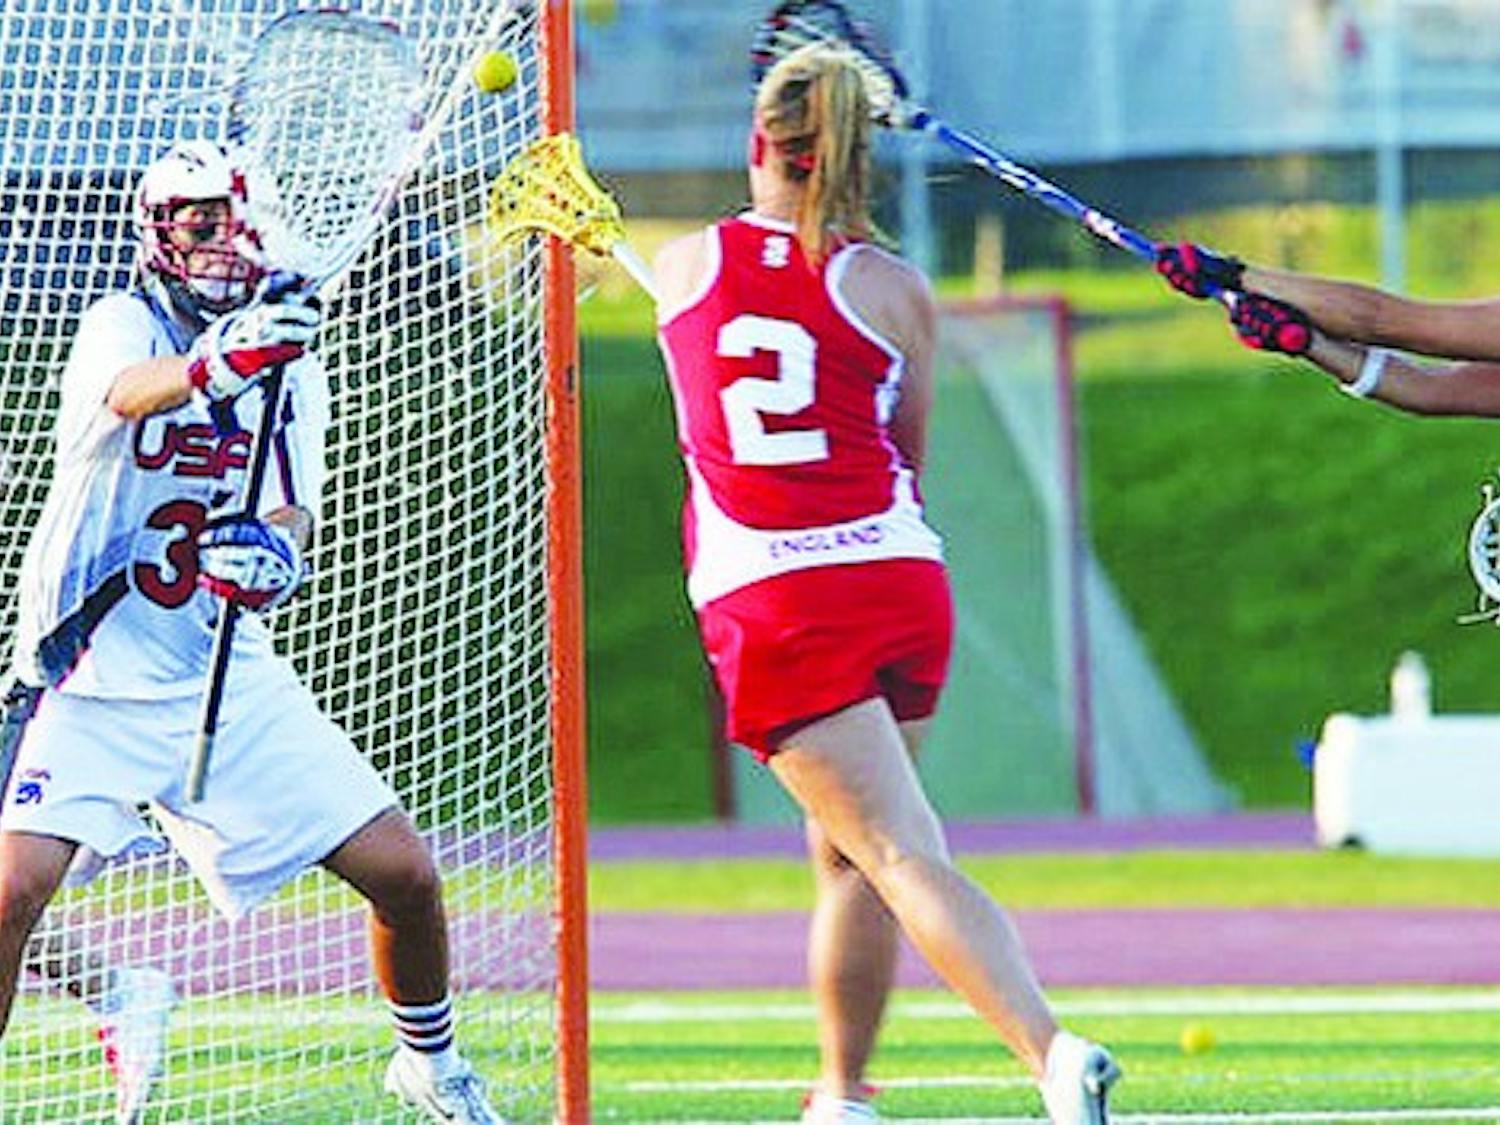 Devon Wills '06 defends the U.S. team's cage during the 2013 women's lacrosse World Cup. Julia Szafman '13 goal tended for team Israel.